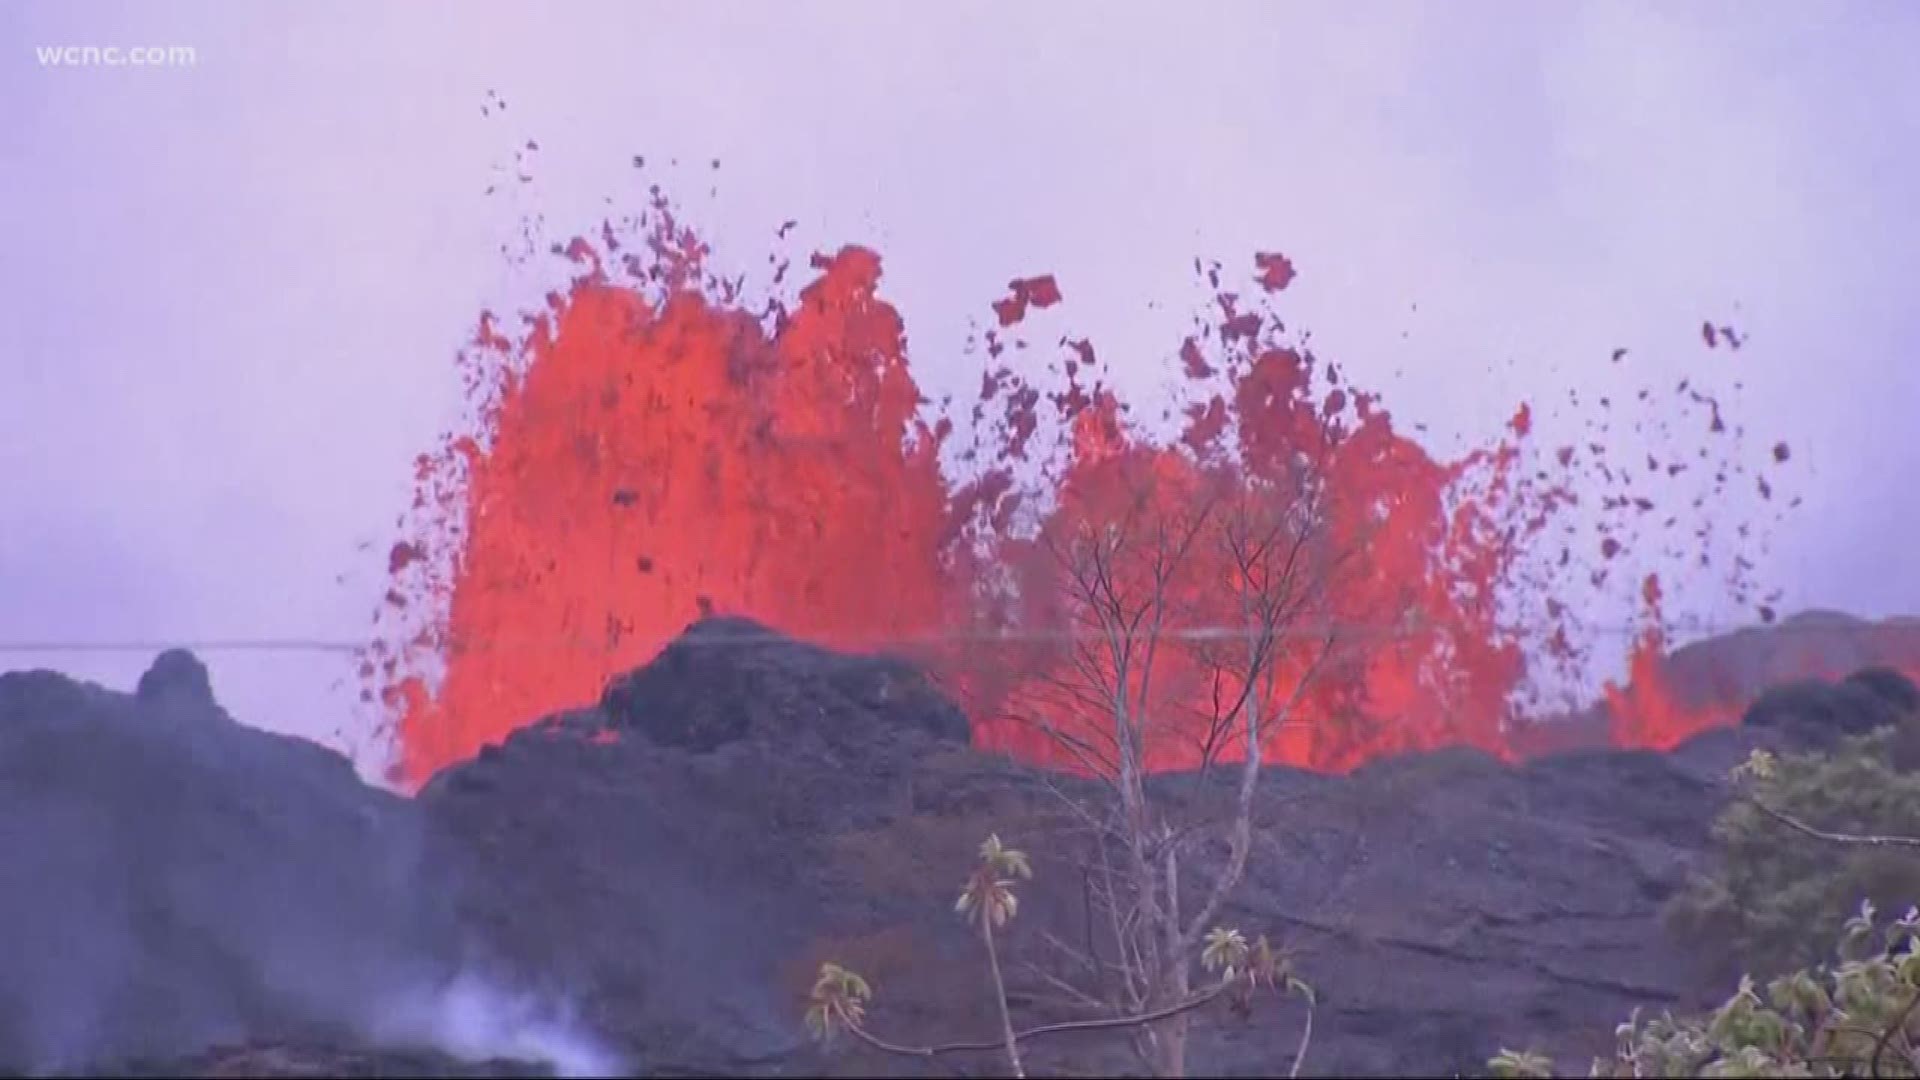 Hawaii's Big Island remains under a state of emergency. The volcano there is erupting repeatedly, destroying more homes over the weekend, and now lava is flowing into the ocean.